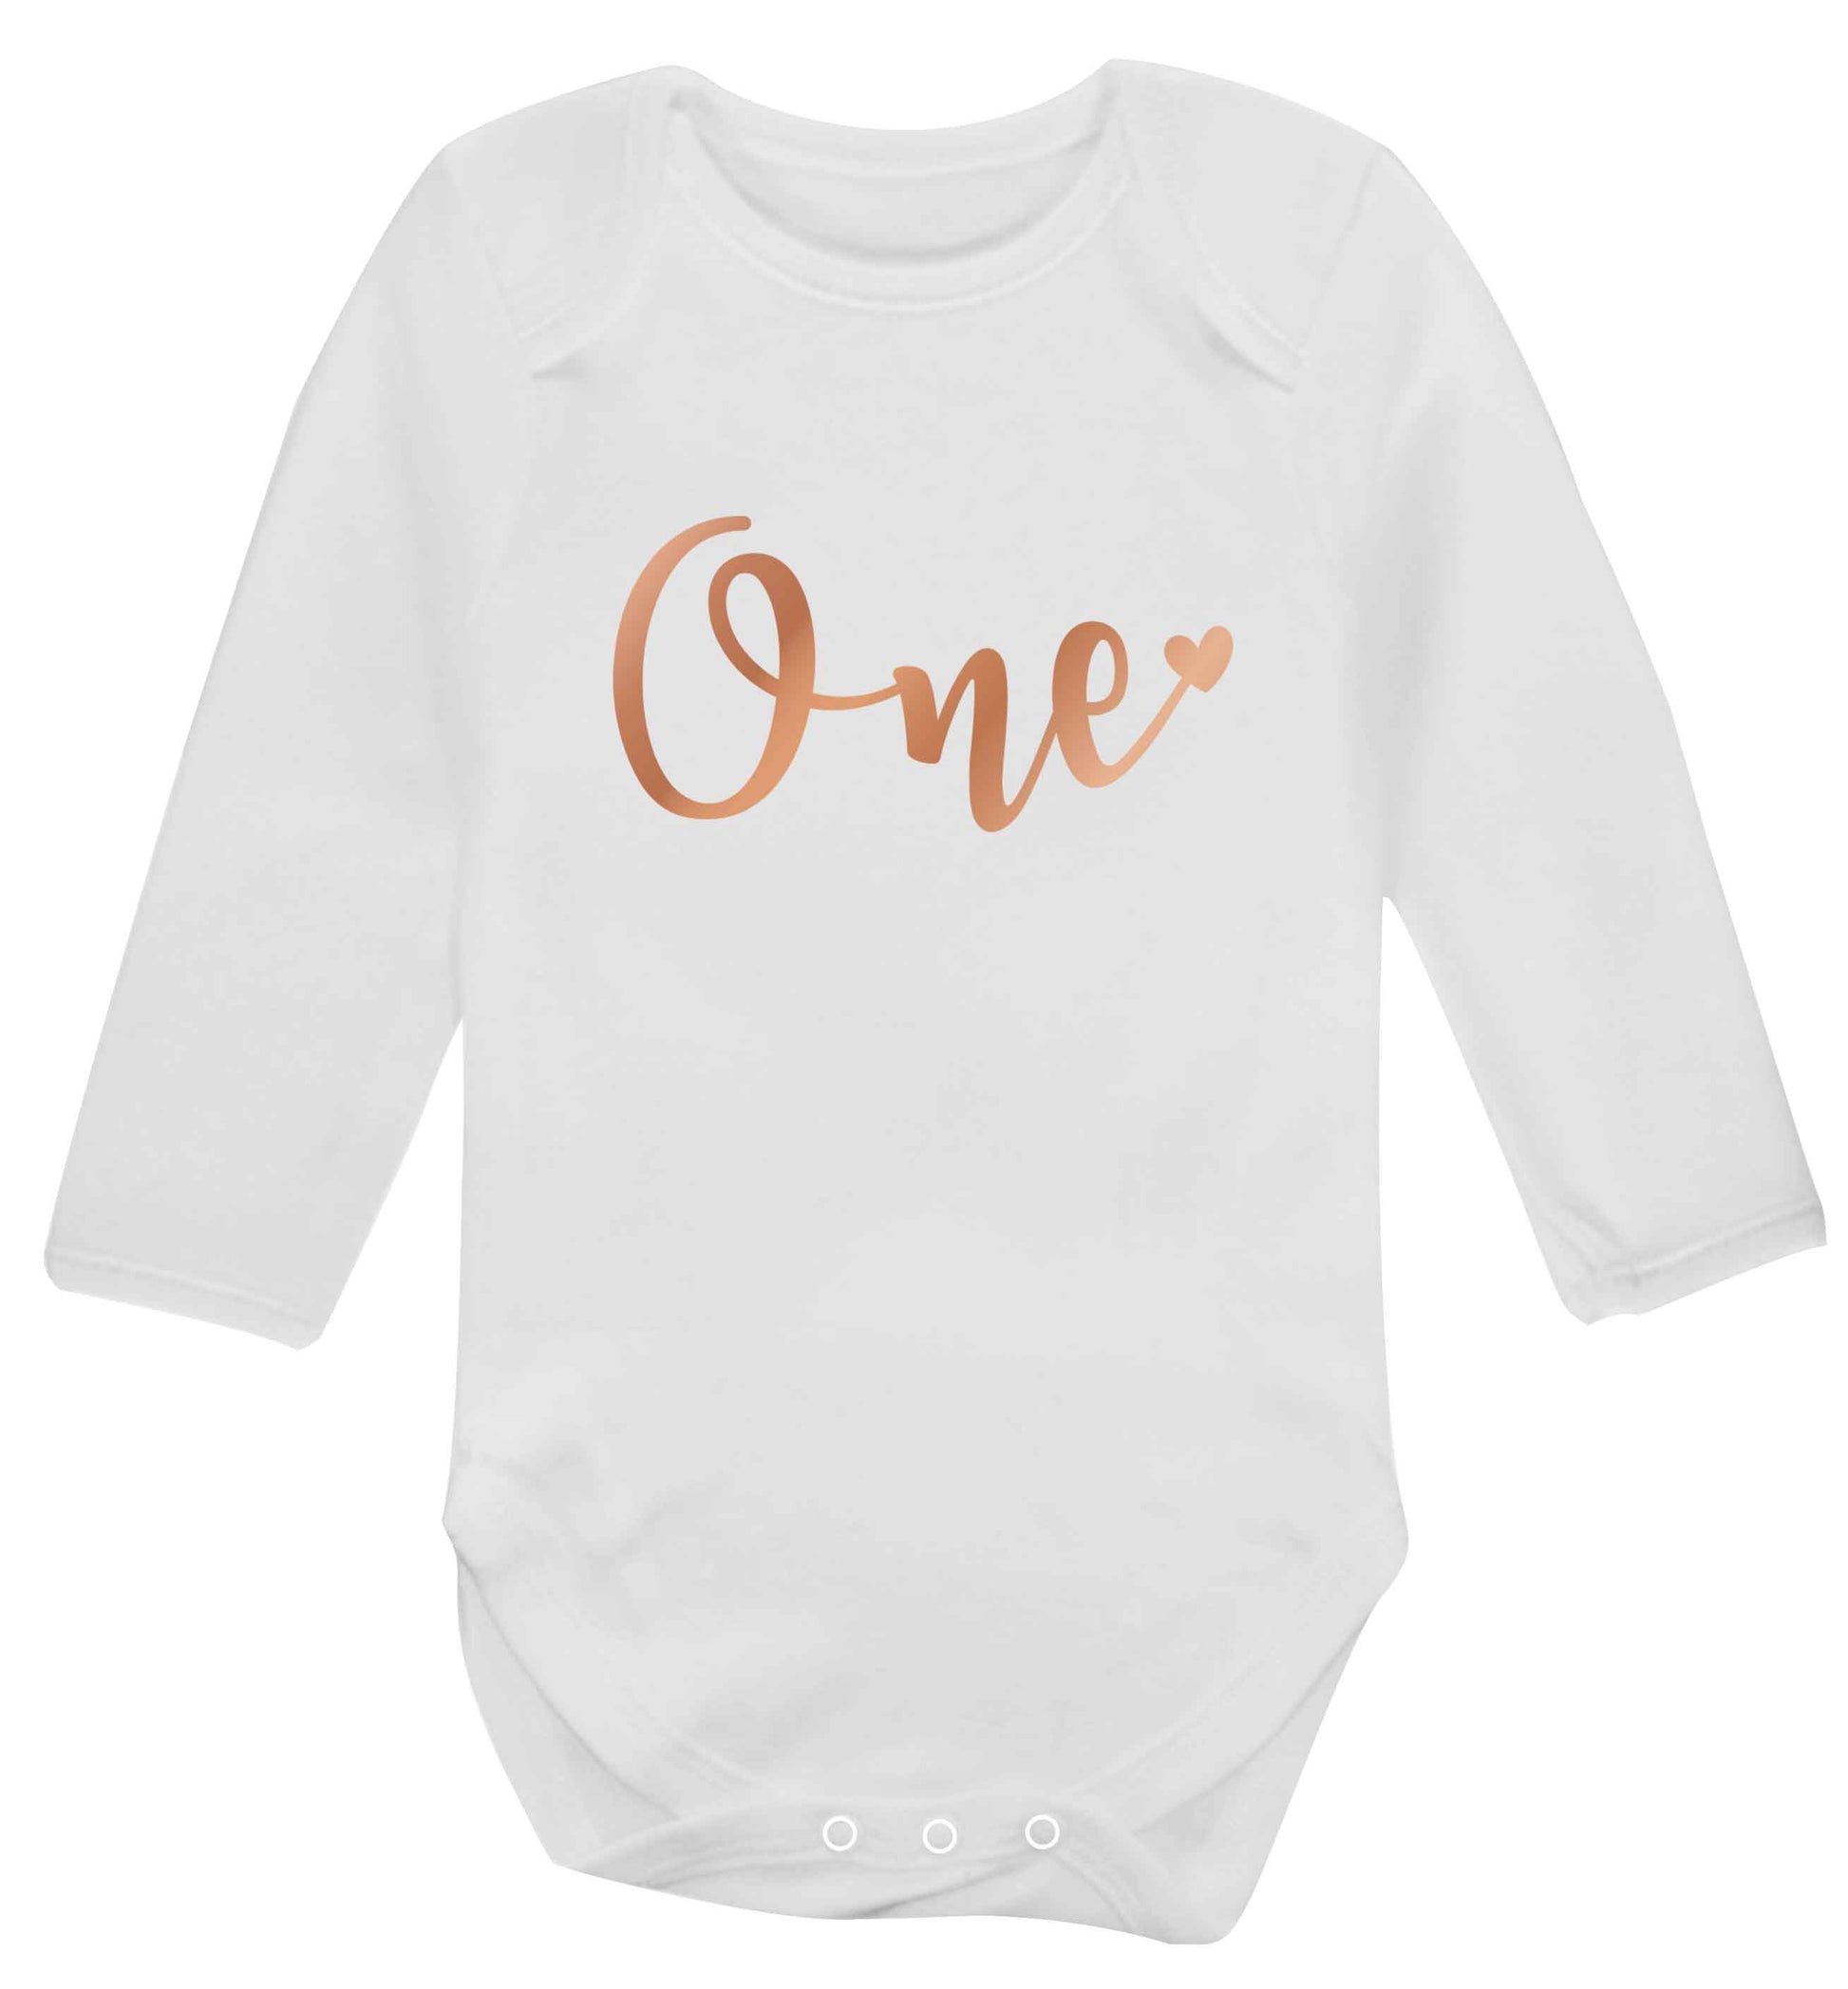 Rose Gold One baby vest long sleeved white 6-12 months